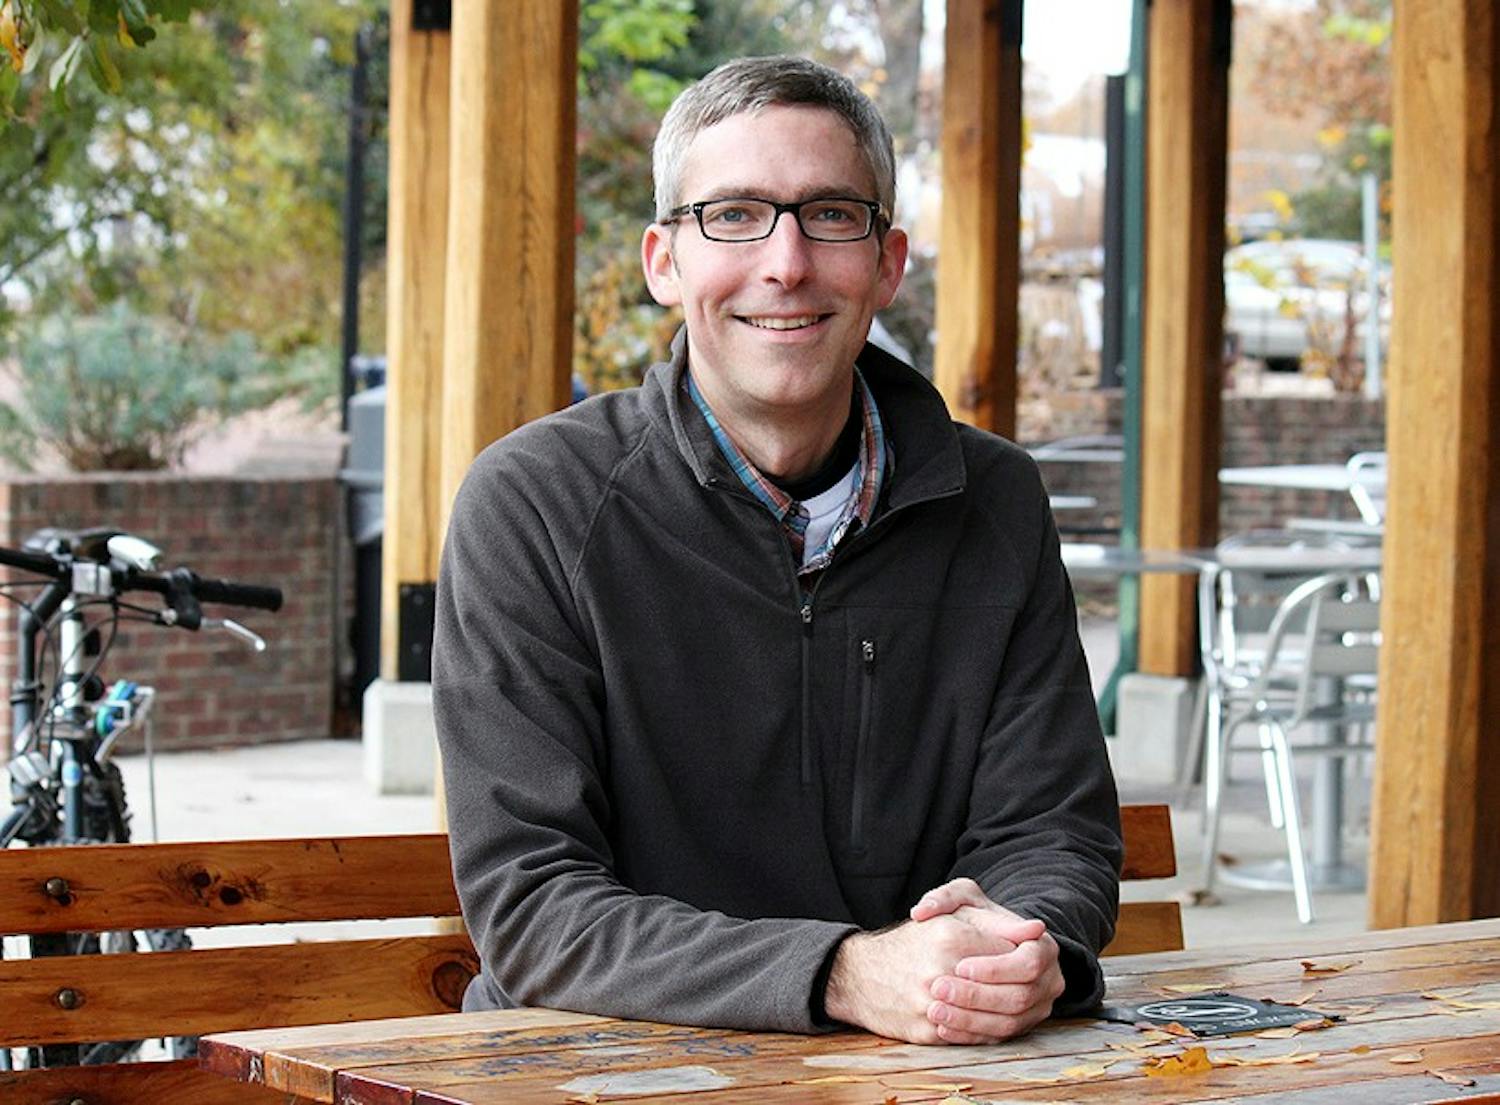 Damon Seils, a member of the Carrboro Planning Department, declared that he will be running for a seat on the Carrboro Board of Aldermen in 2012.